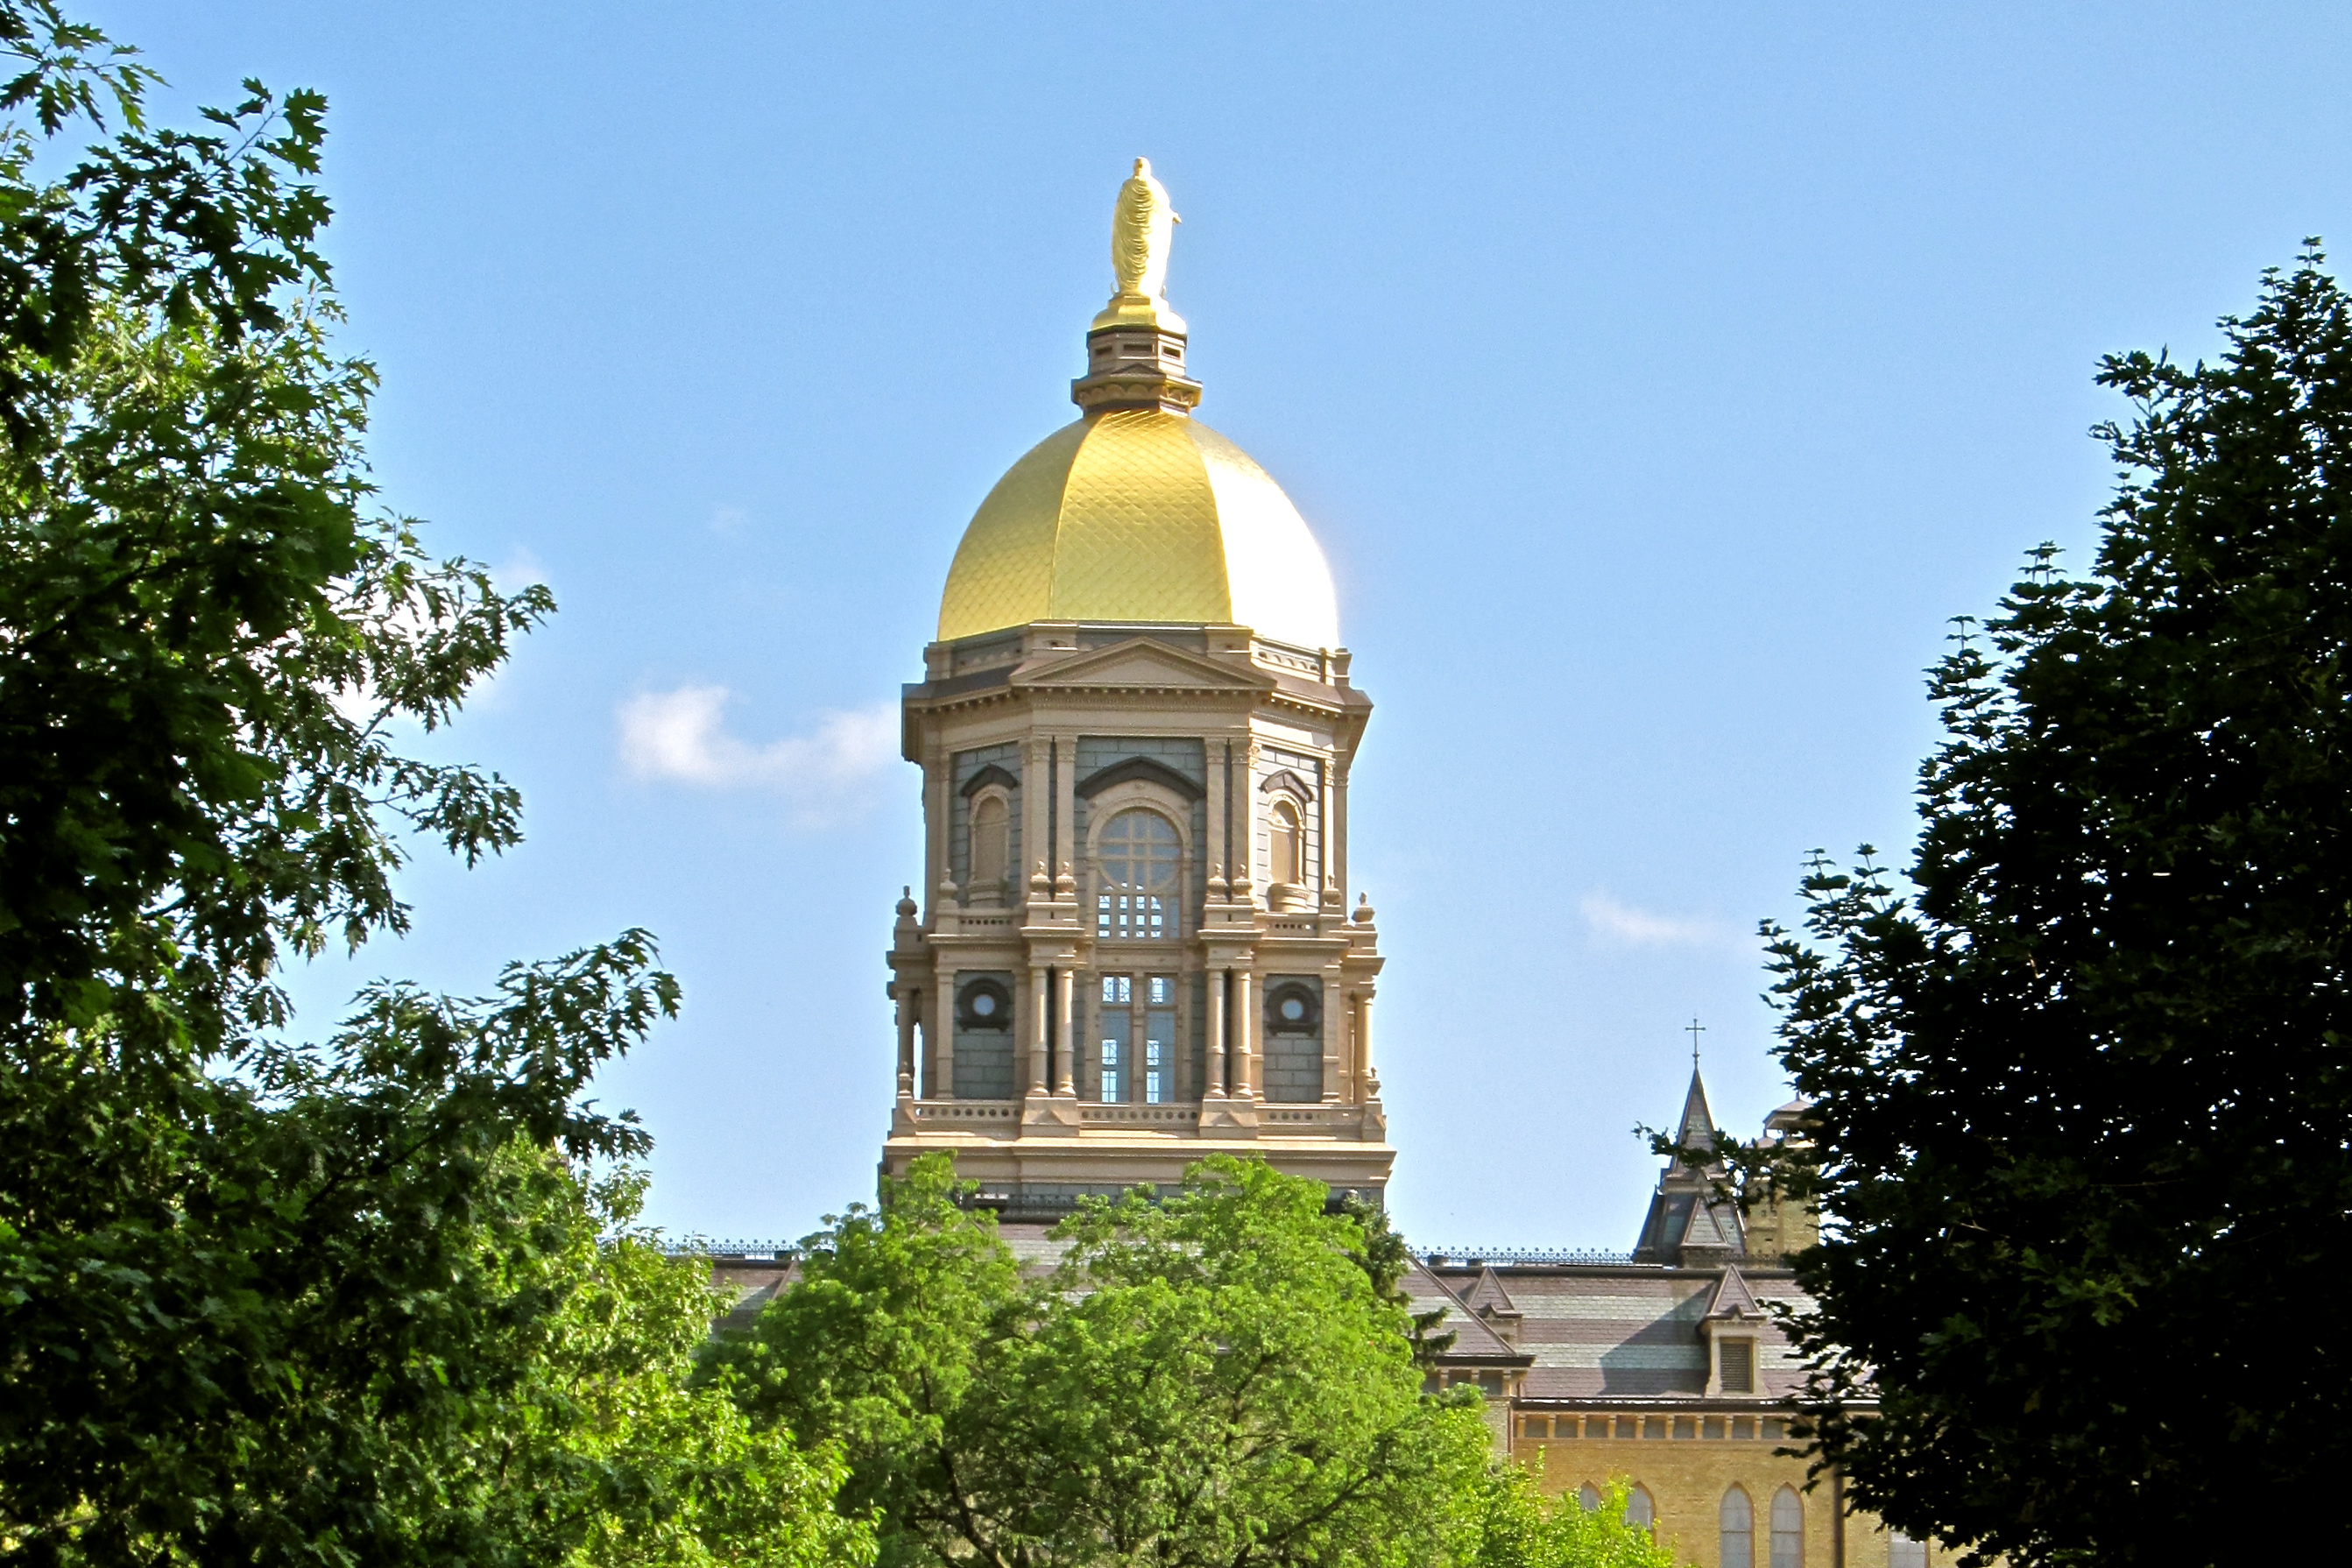 File:The Golden Dome.jpg - Wikimedia Commons